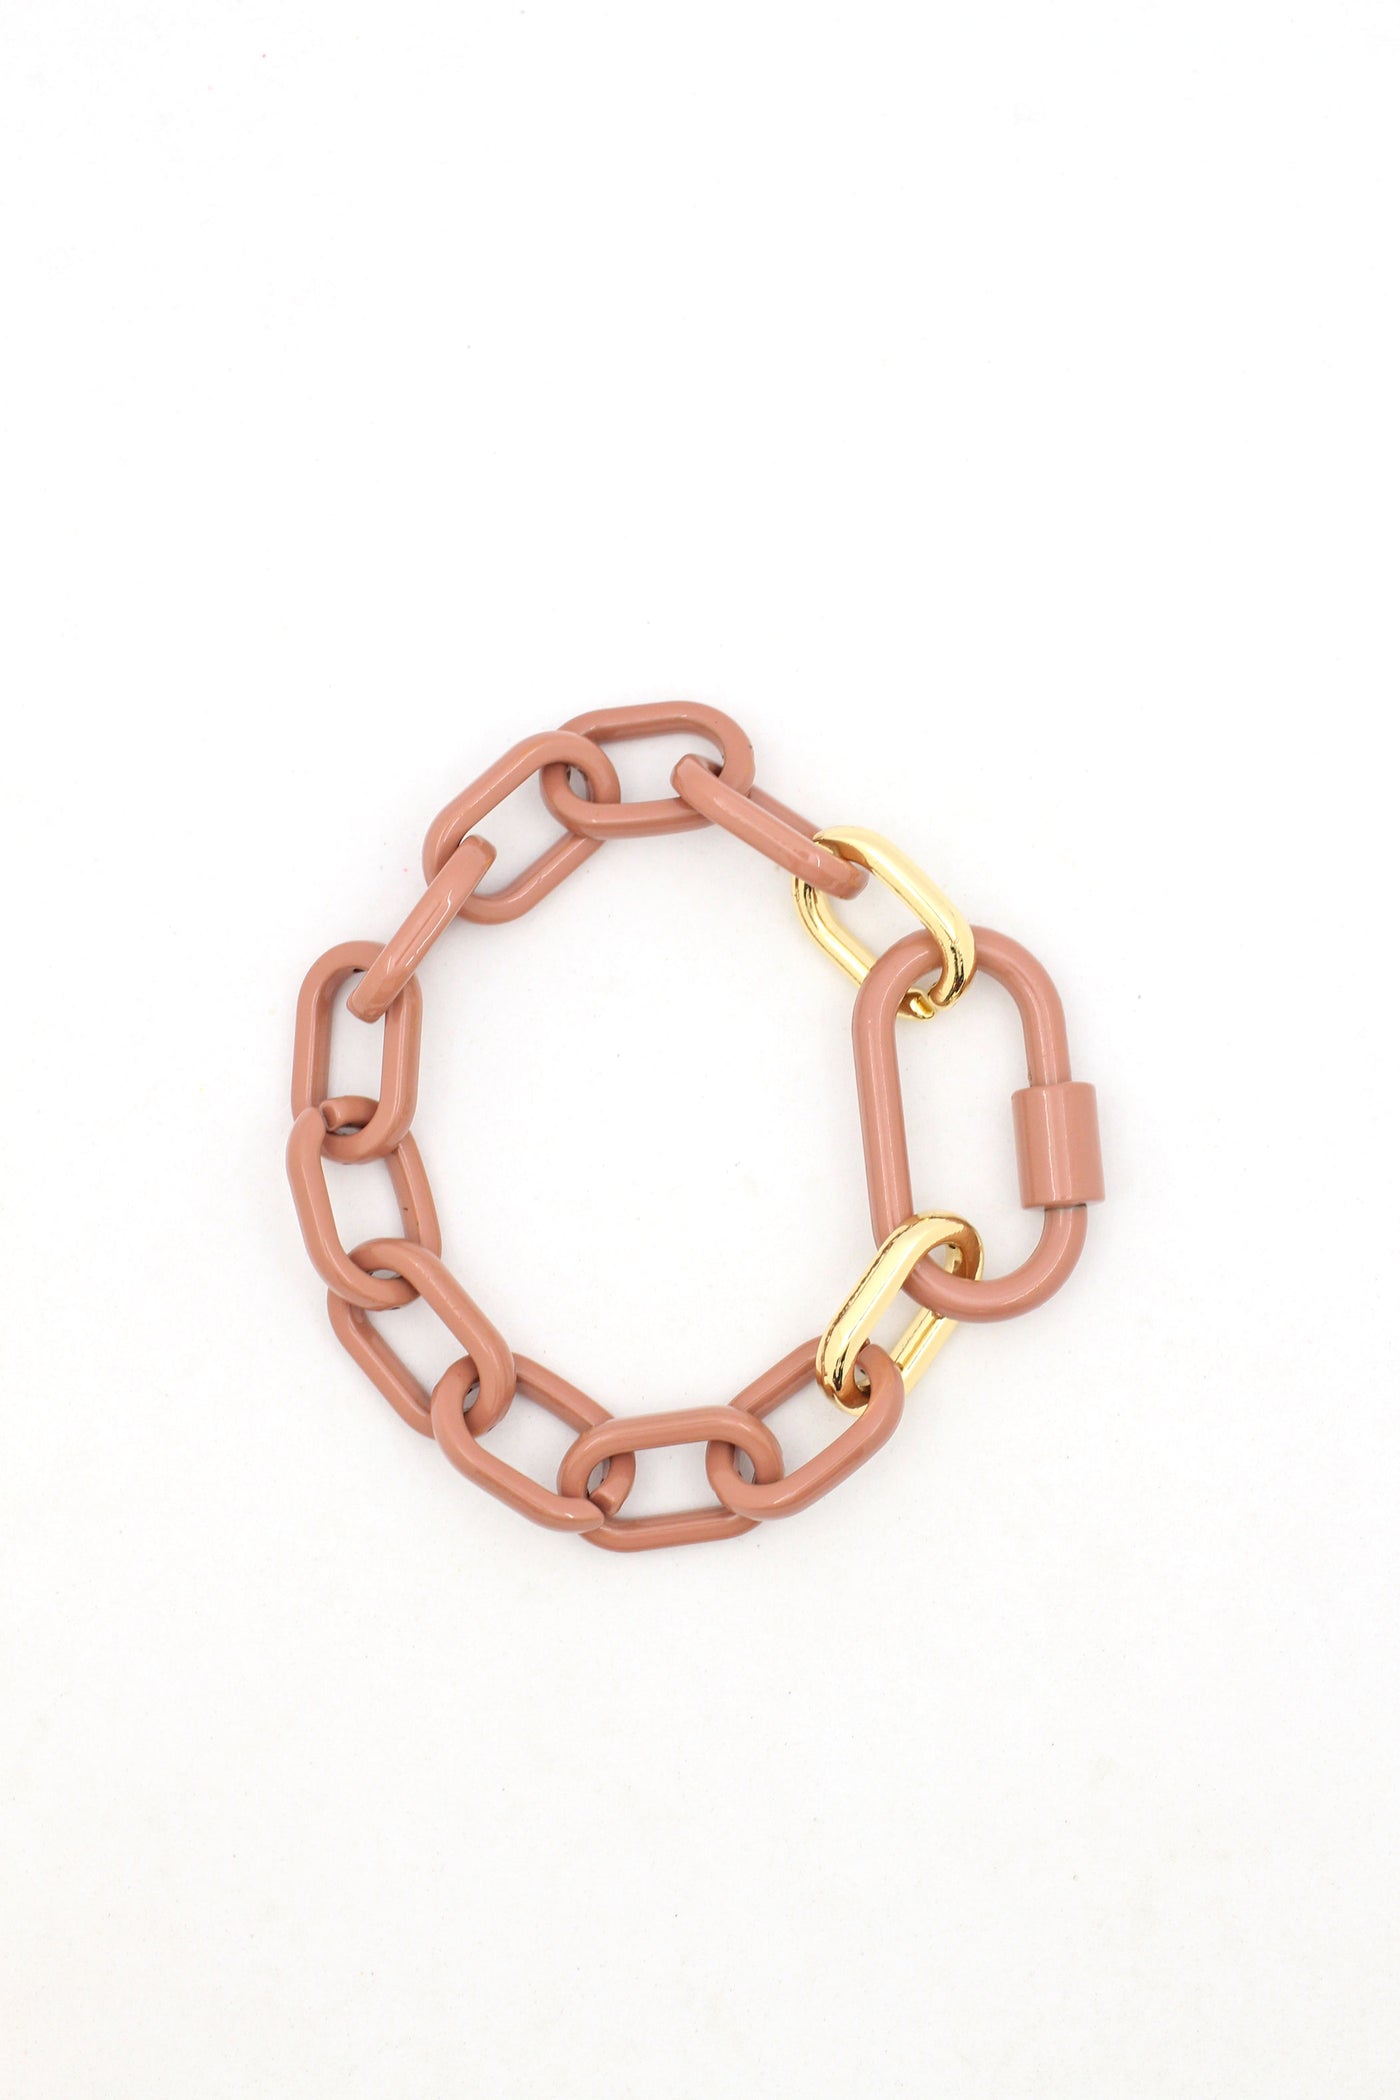 Luxe Link Enamel Chain Bracelet with Carabiner Lock Clasp, Assorted Colors